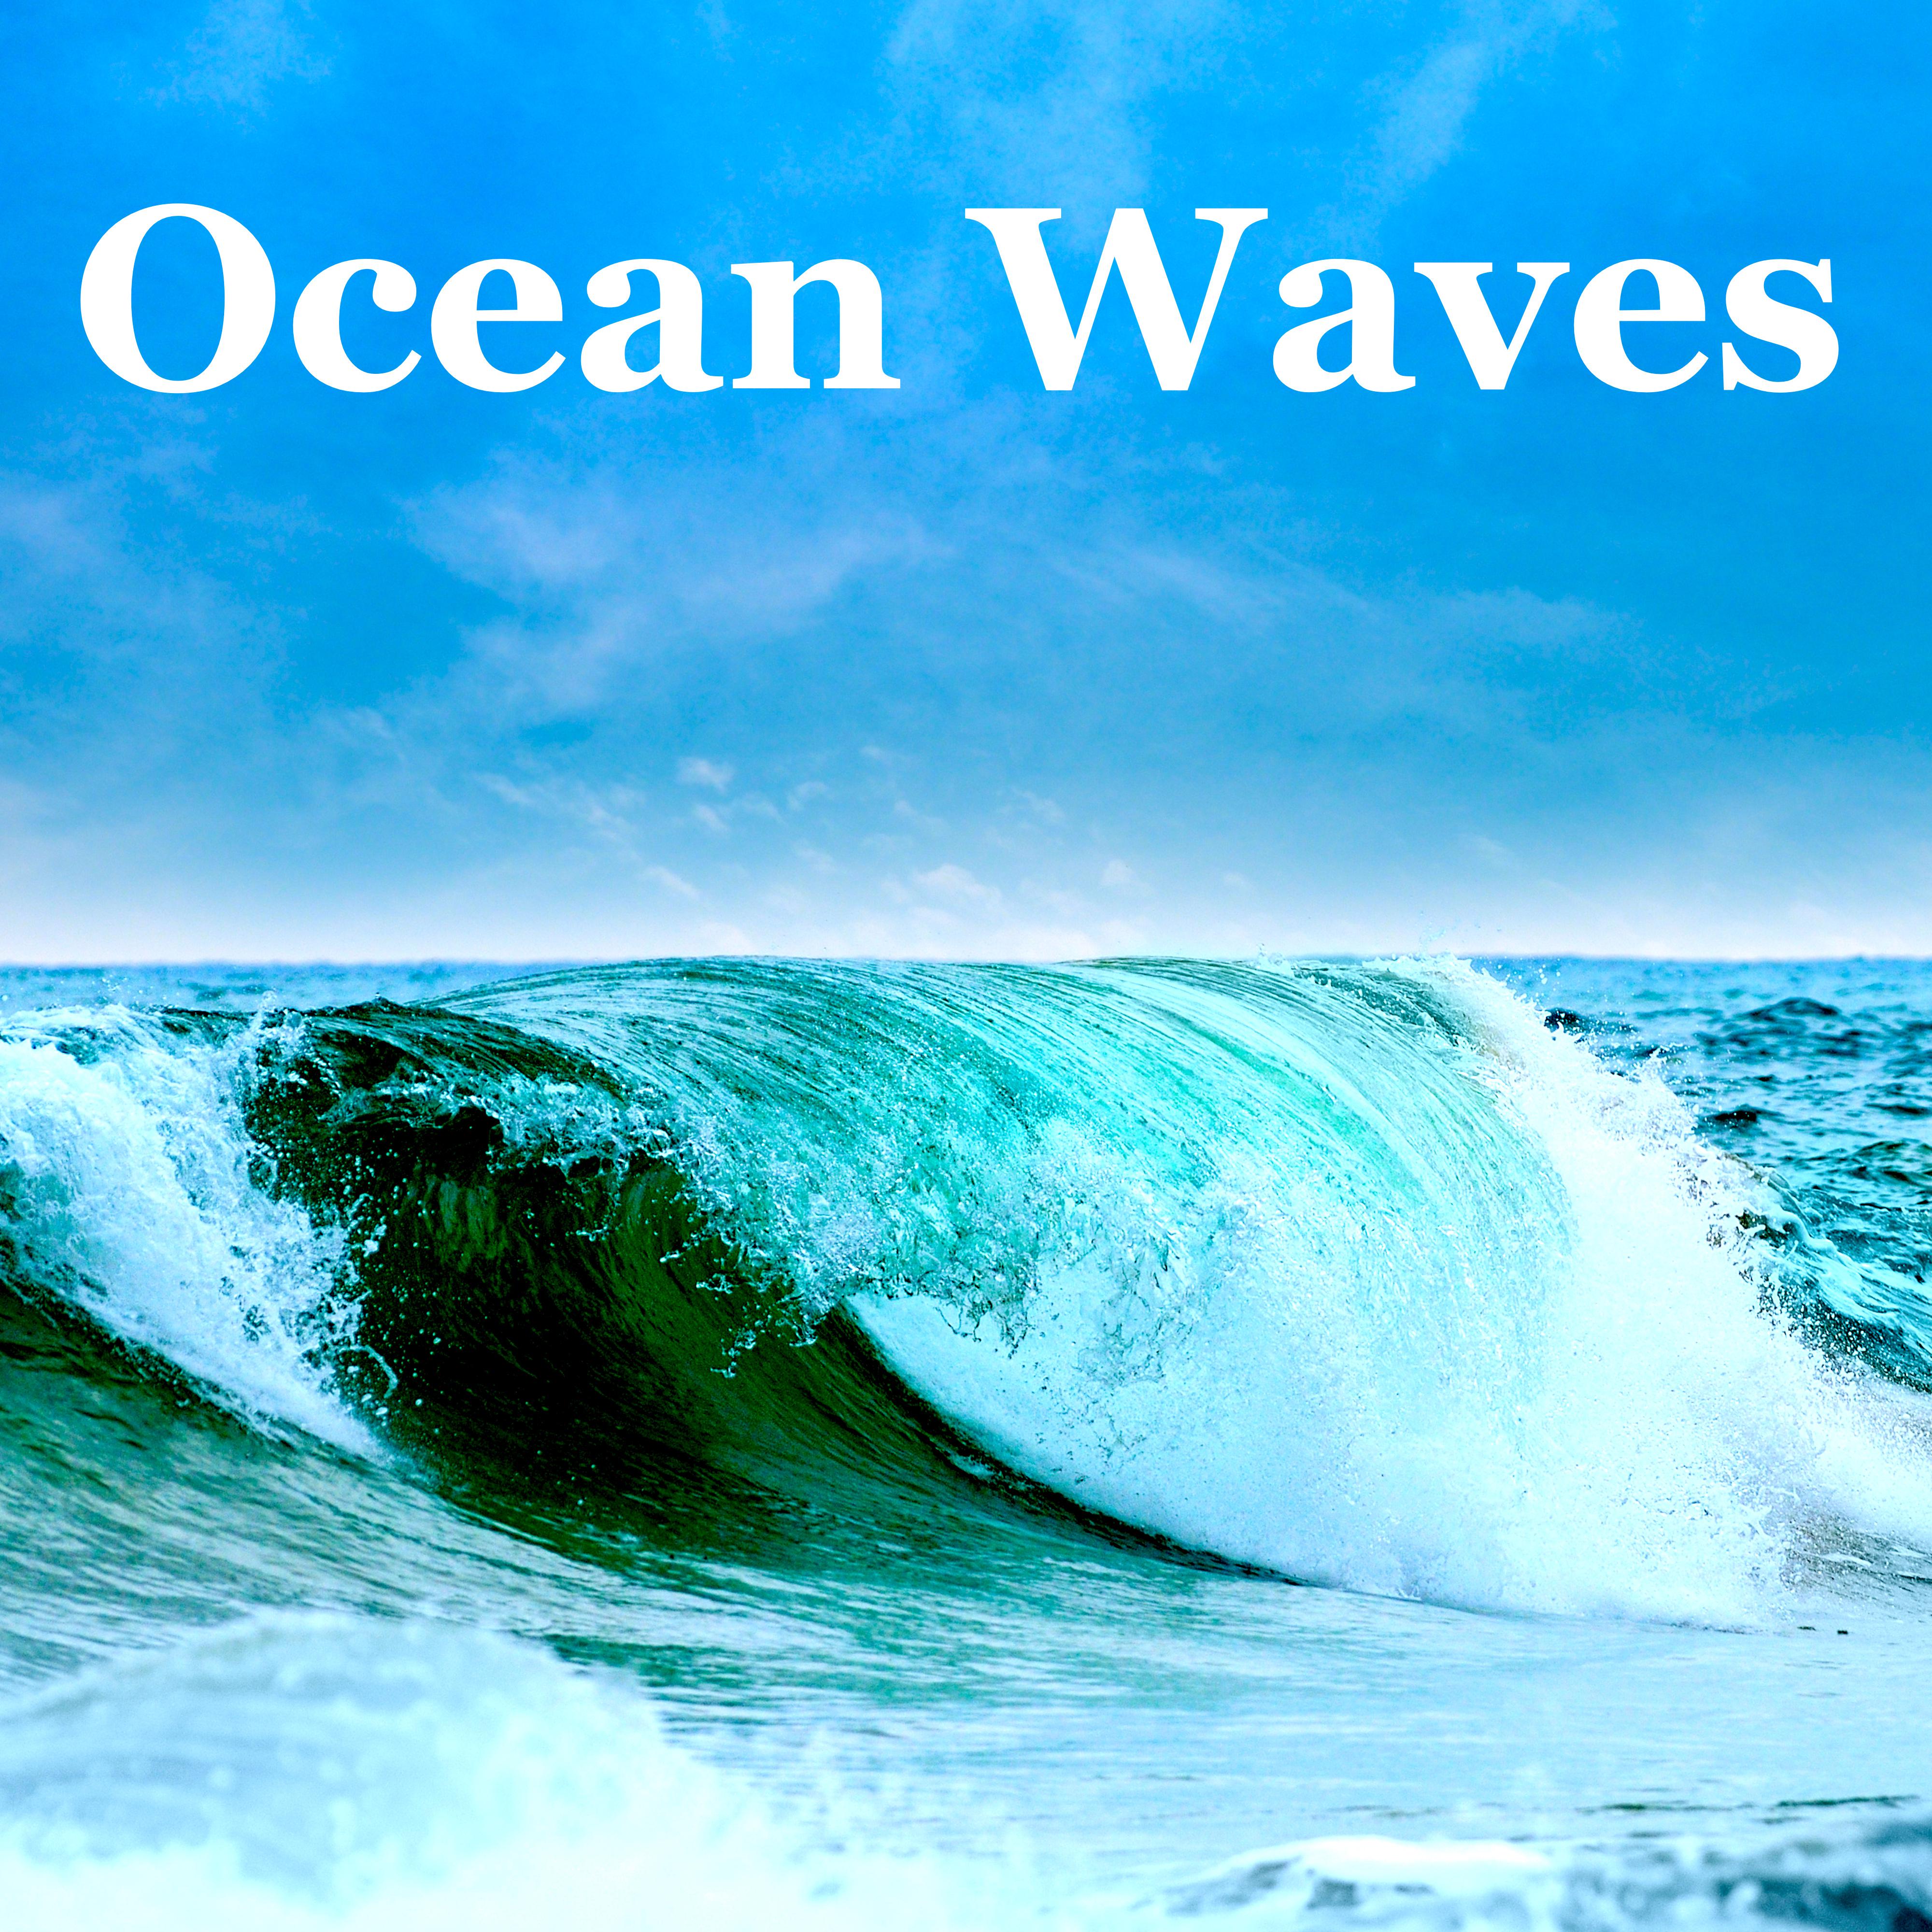 Ocean Waves  Sounds of Nature White Noise for Mindfulness Meditation, Relaxation, Yoga  Good Sleep